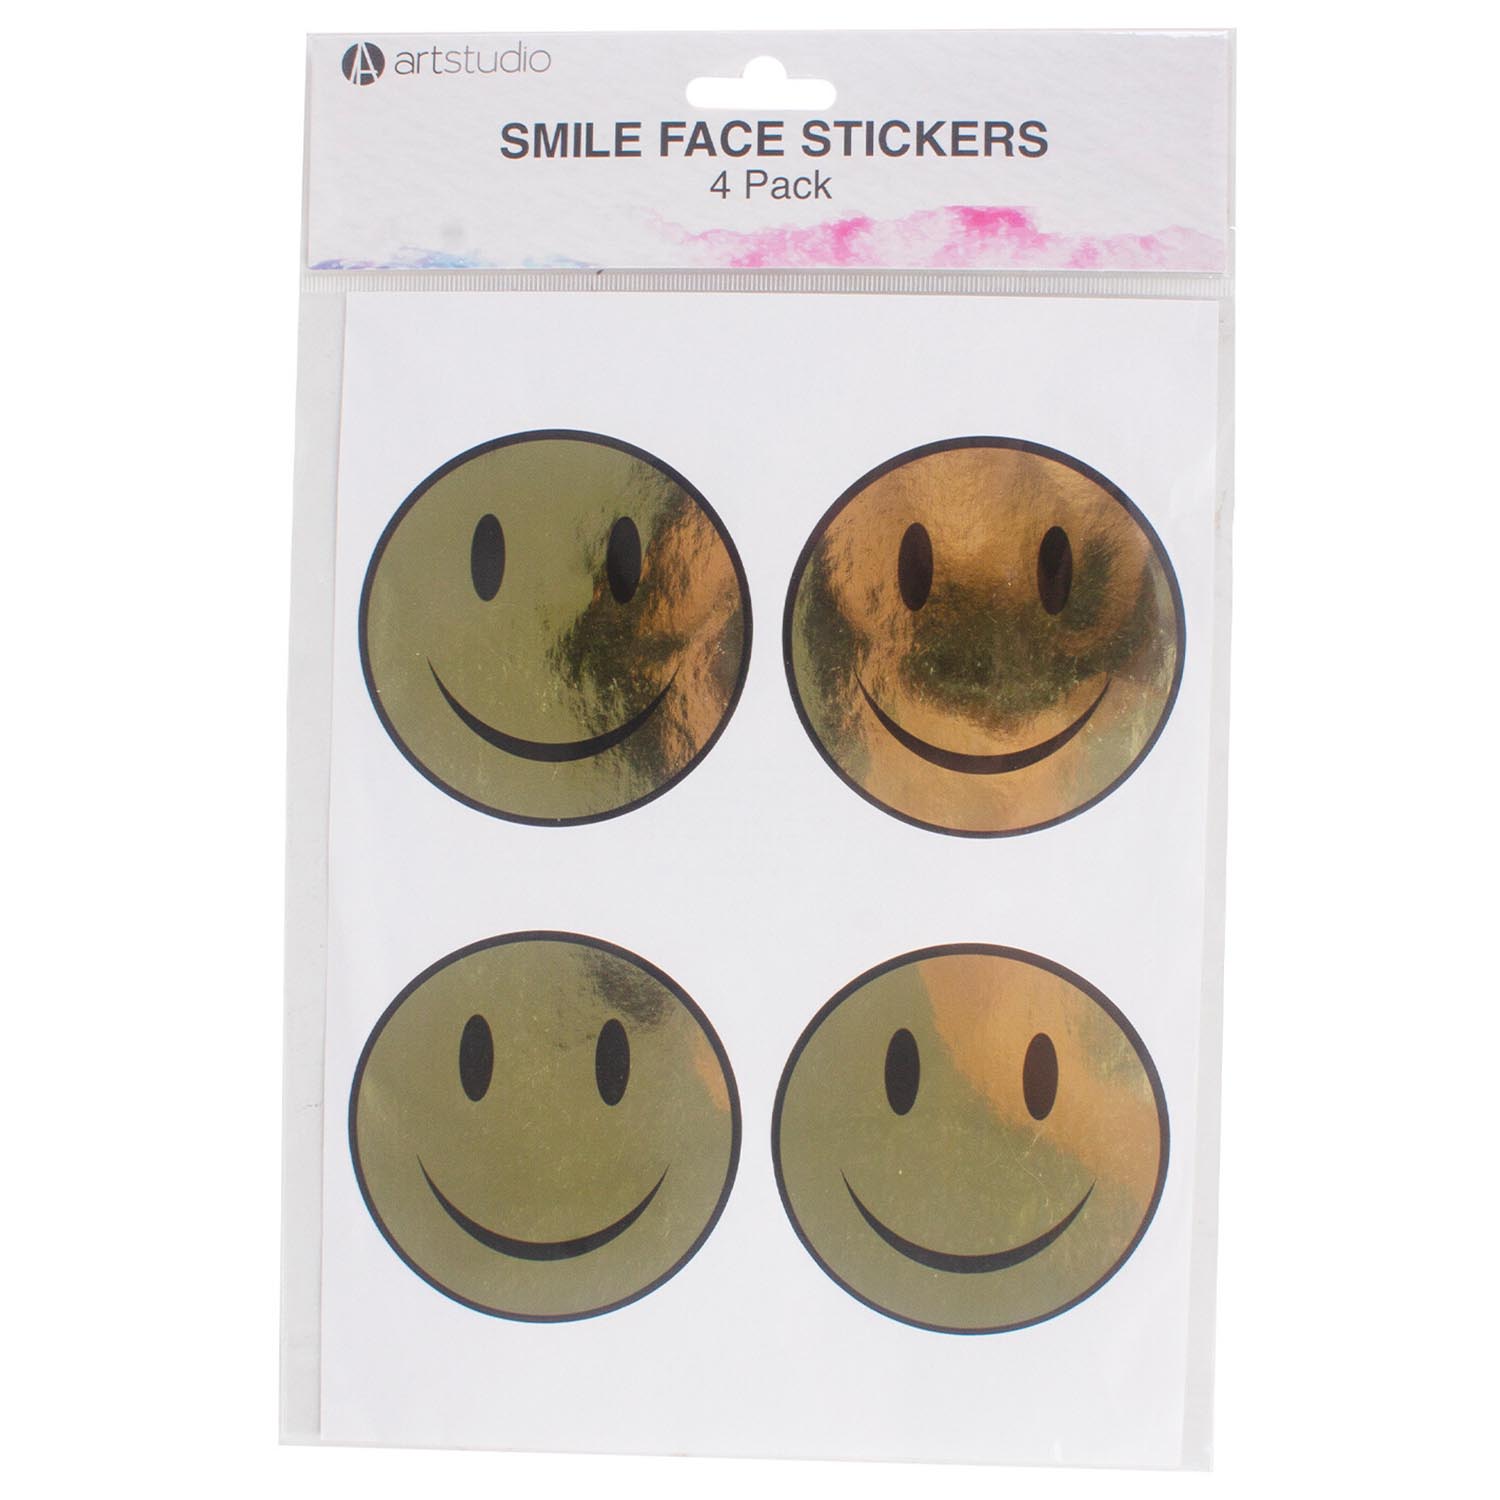 Art Studio Gold Smile Face Stickers 4 Pack Image